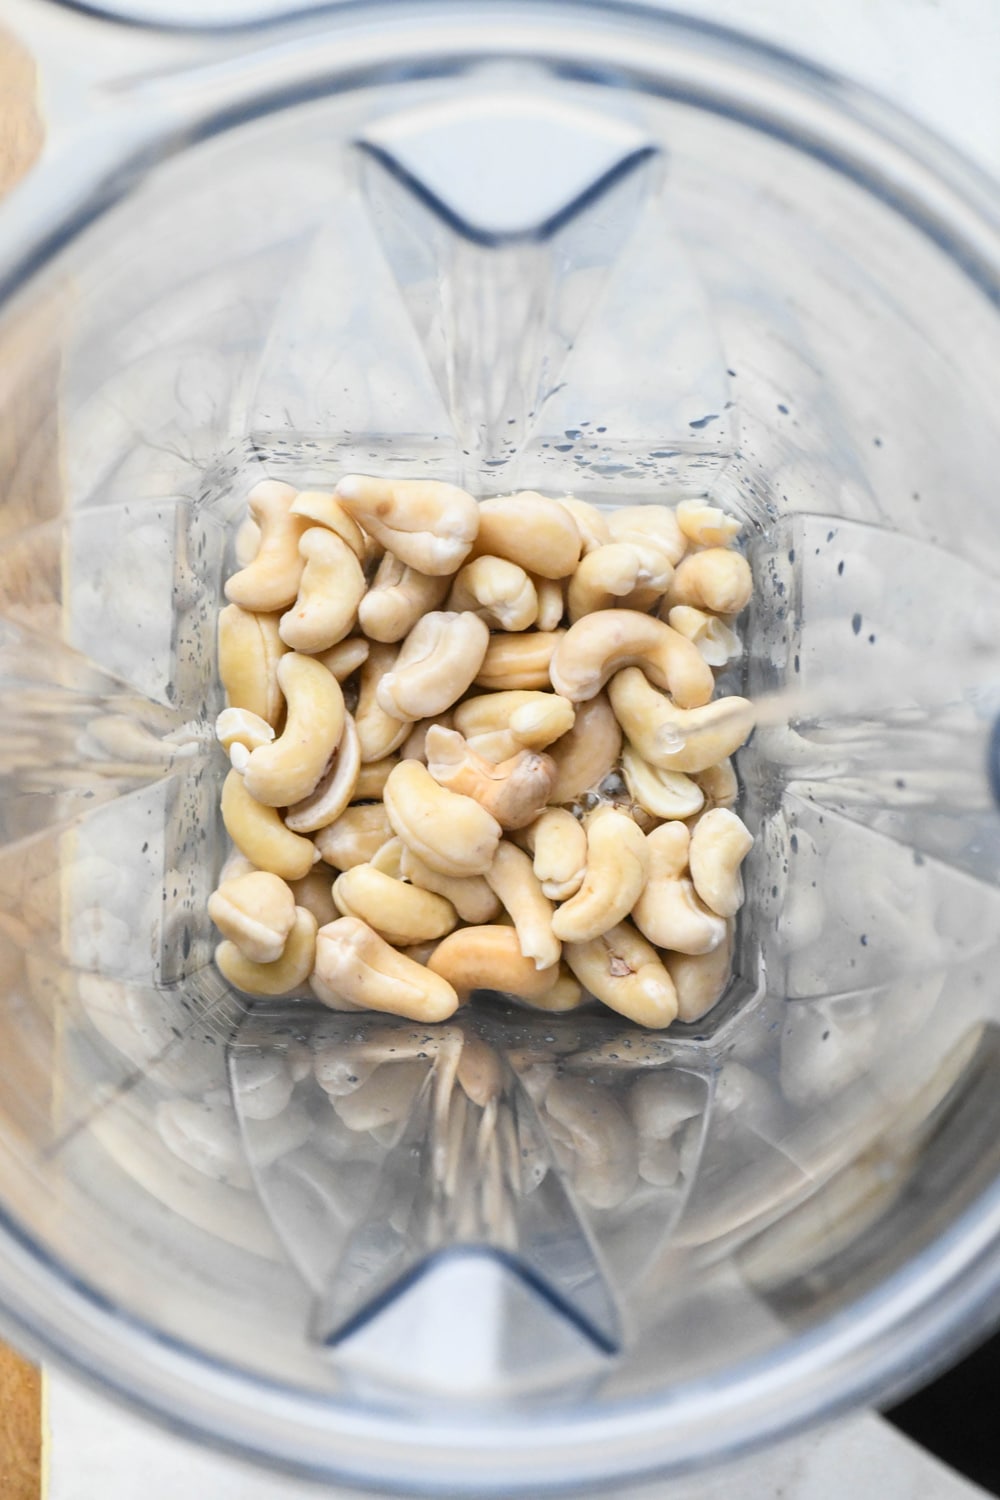 How to make cashew cream: Soaked cashews in blender container with water before blending.